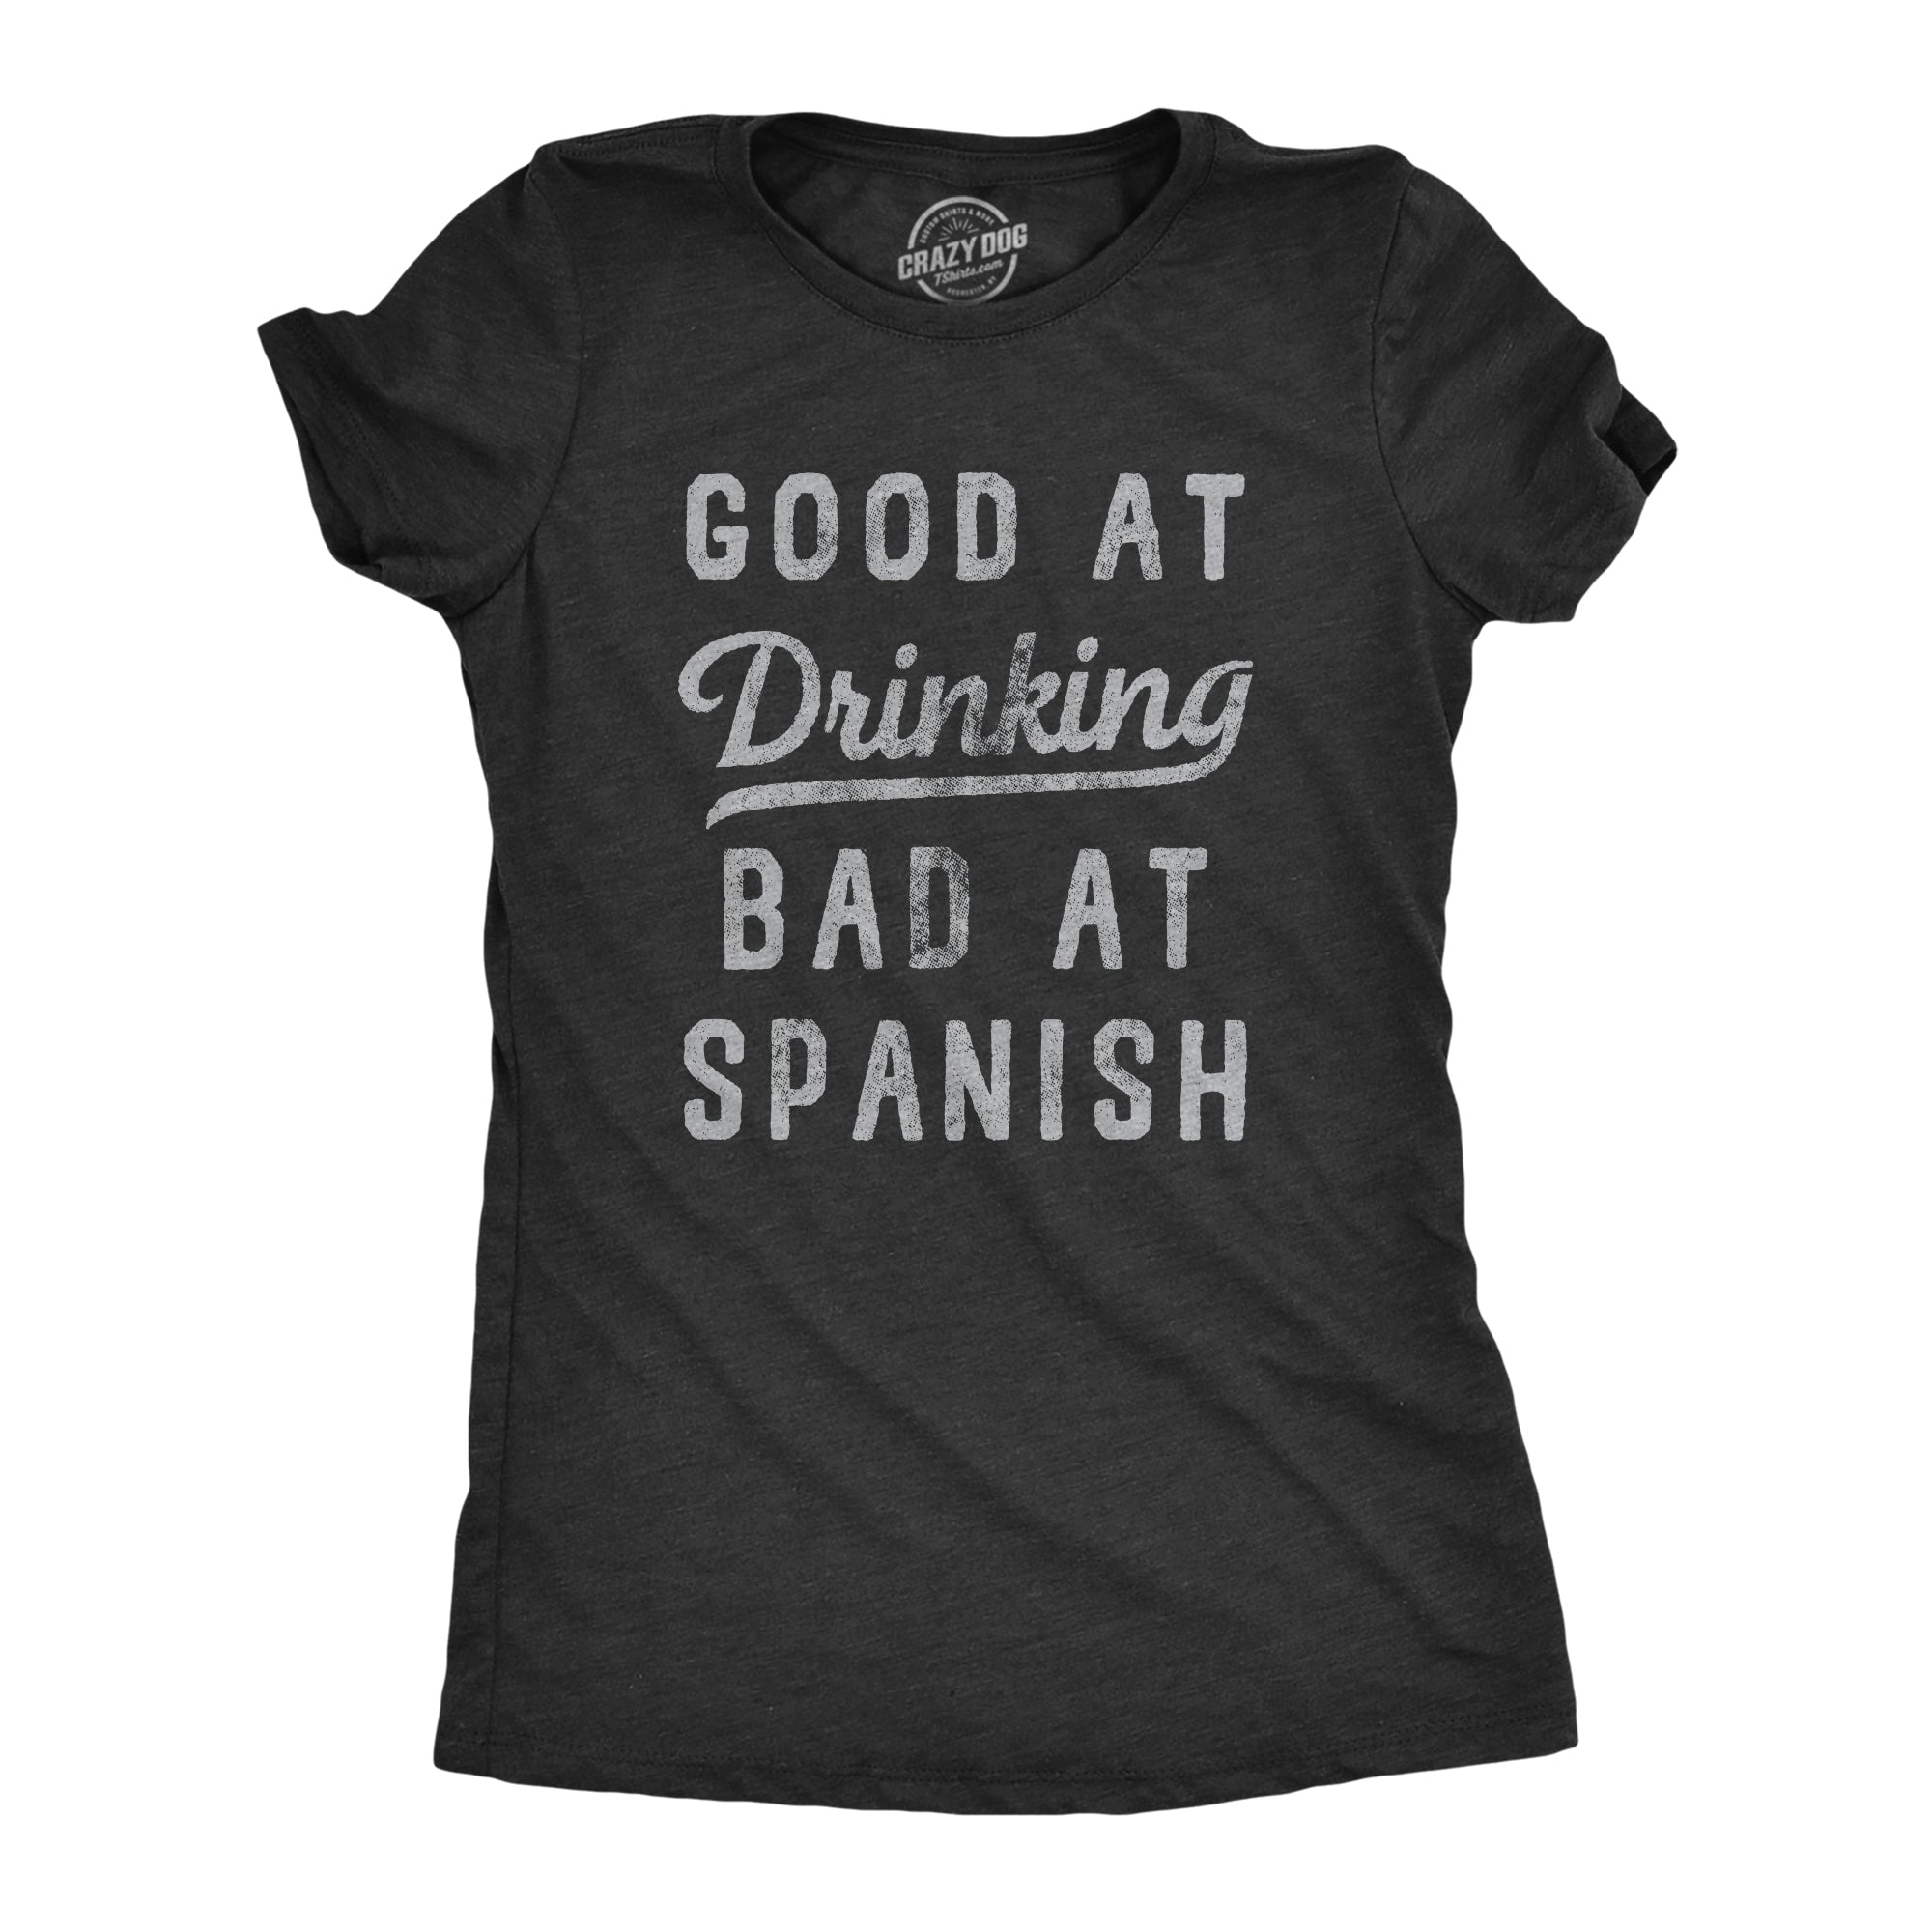 Funny Heather Black Good At Drinking Bad At Spanish Womens T Shirt Nerdy Drinking Tee